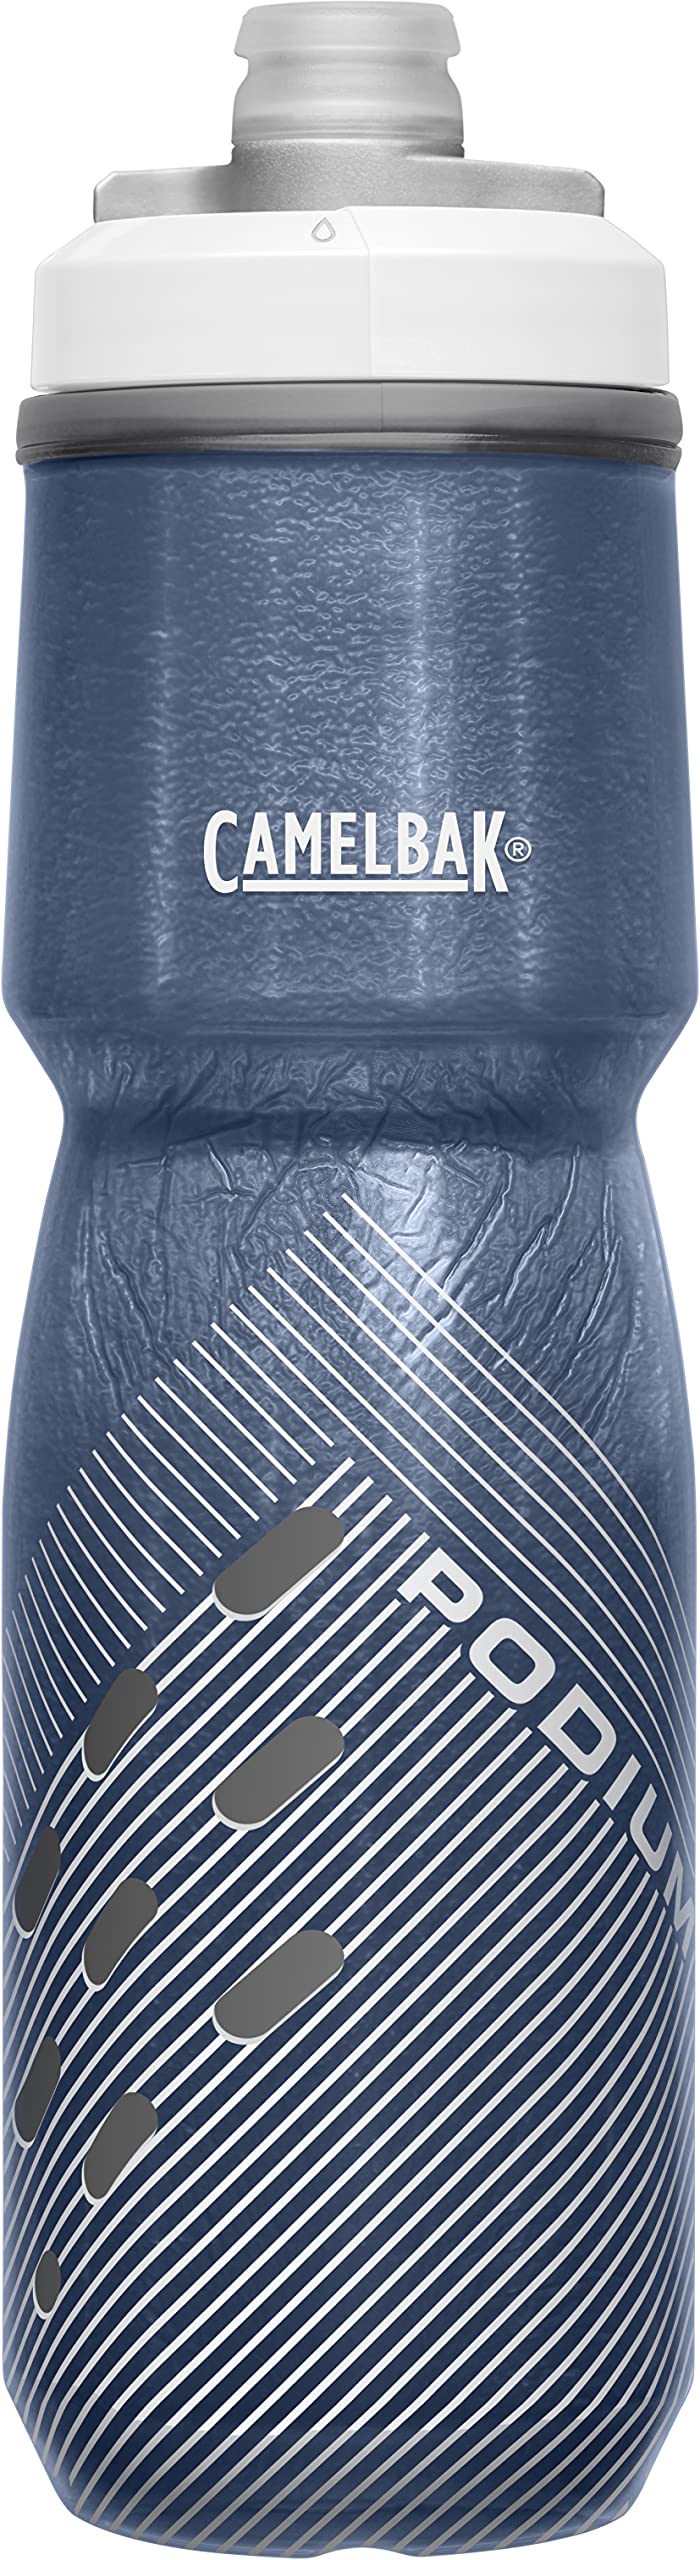 CamelBak Podium Chill Insulated Bike Water Bottle - Easy Squeeze Bottle - Fits Most Bike Cages - 24oz, Navy Perforated